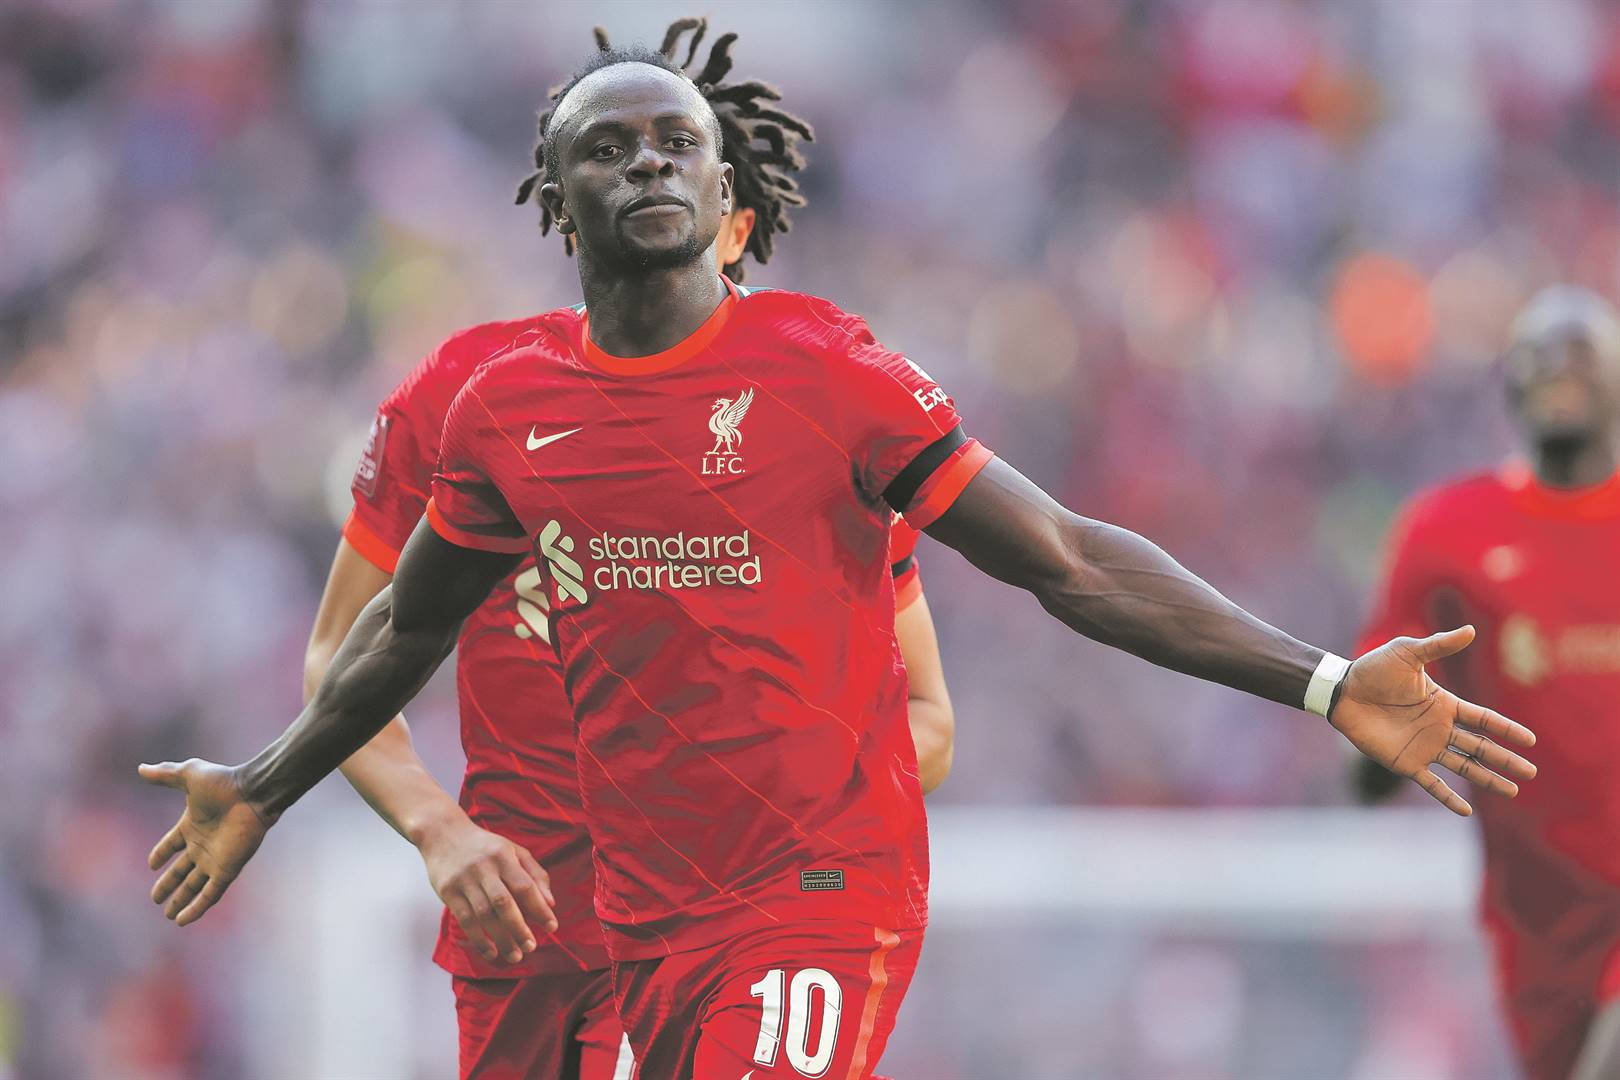 Sadio Mané of Liverpool celebrates after scoring his side's third goal during The Emirates FA Cup semifinal match against Manchester City at Wembley Stadium in the UK yesterday. Photo: James Gill - Danehouse/Getty Images